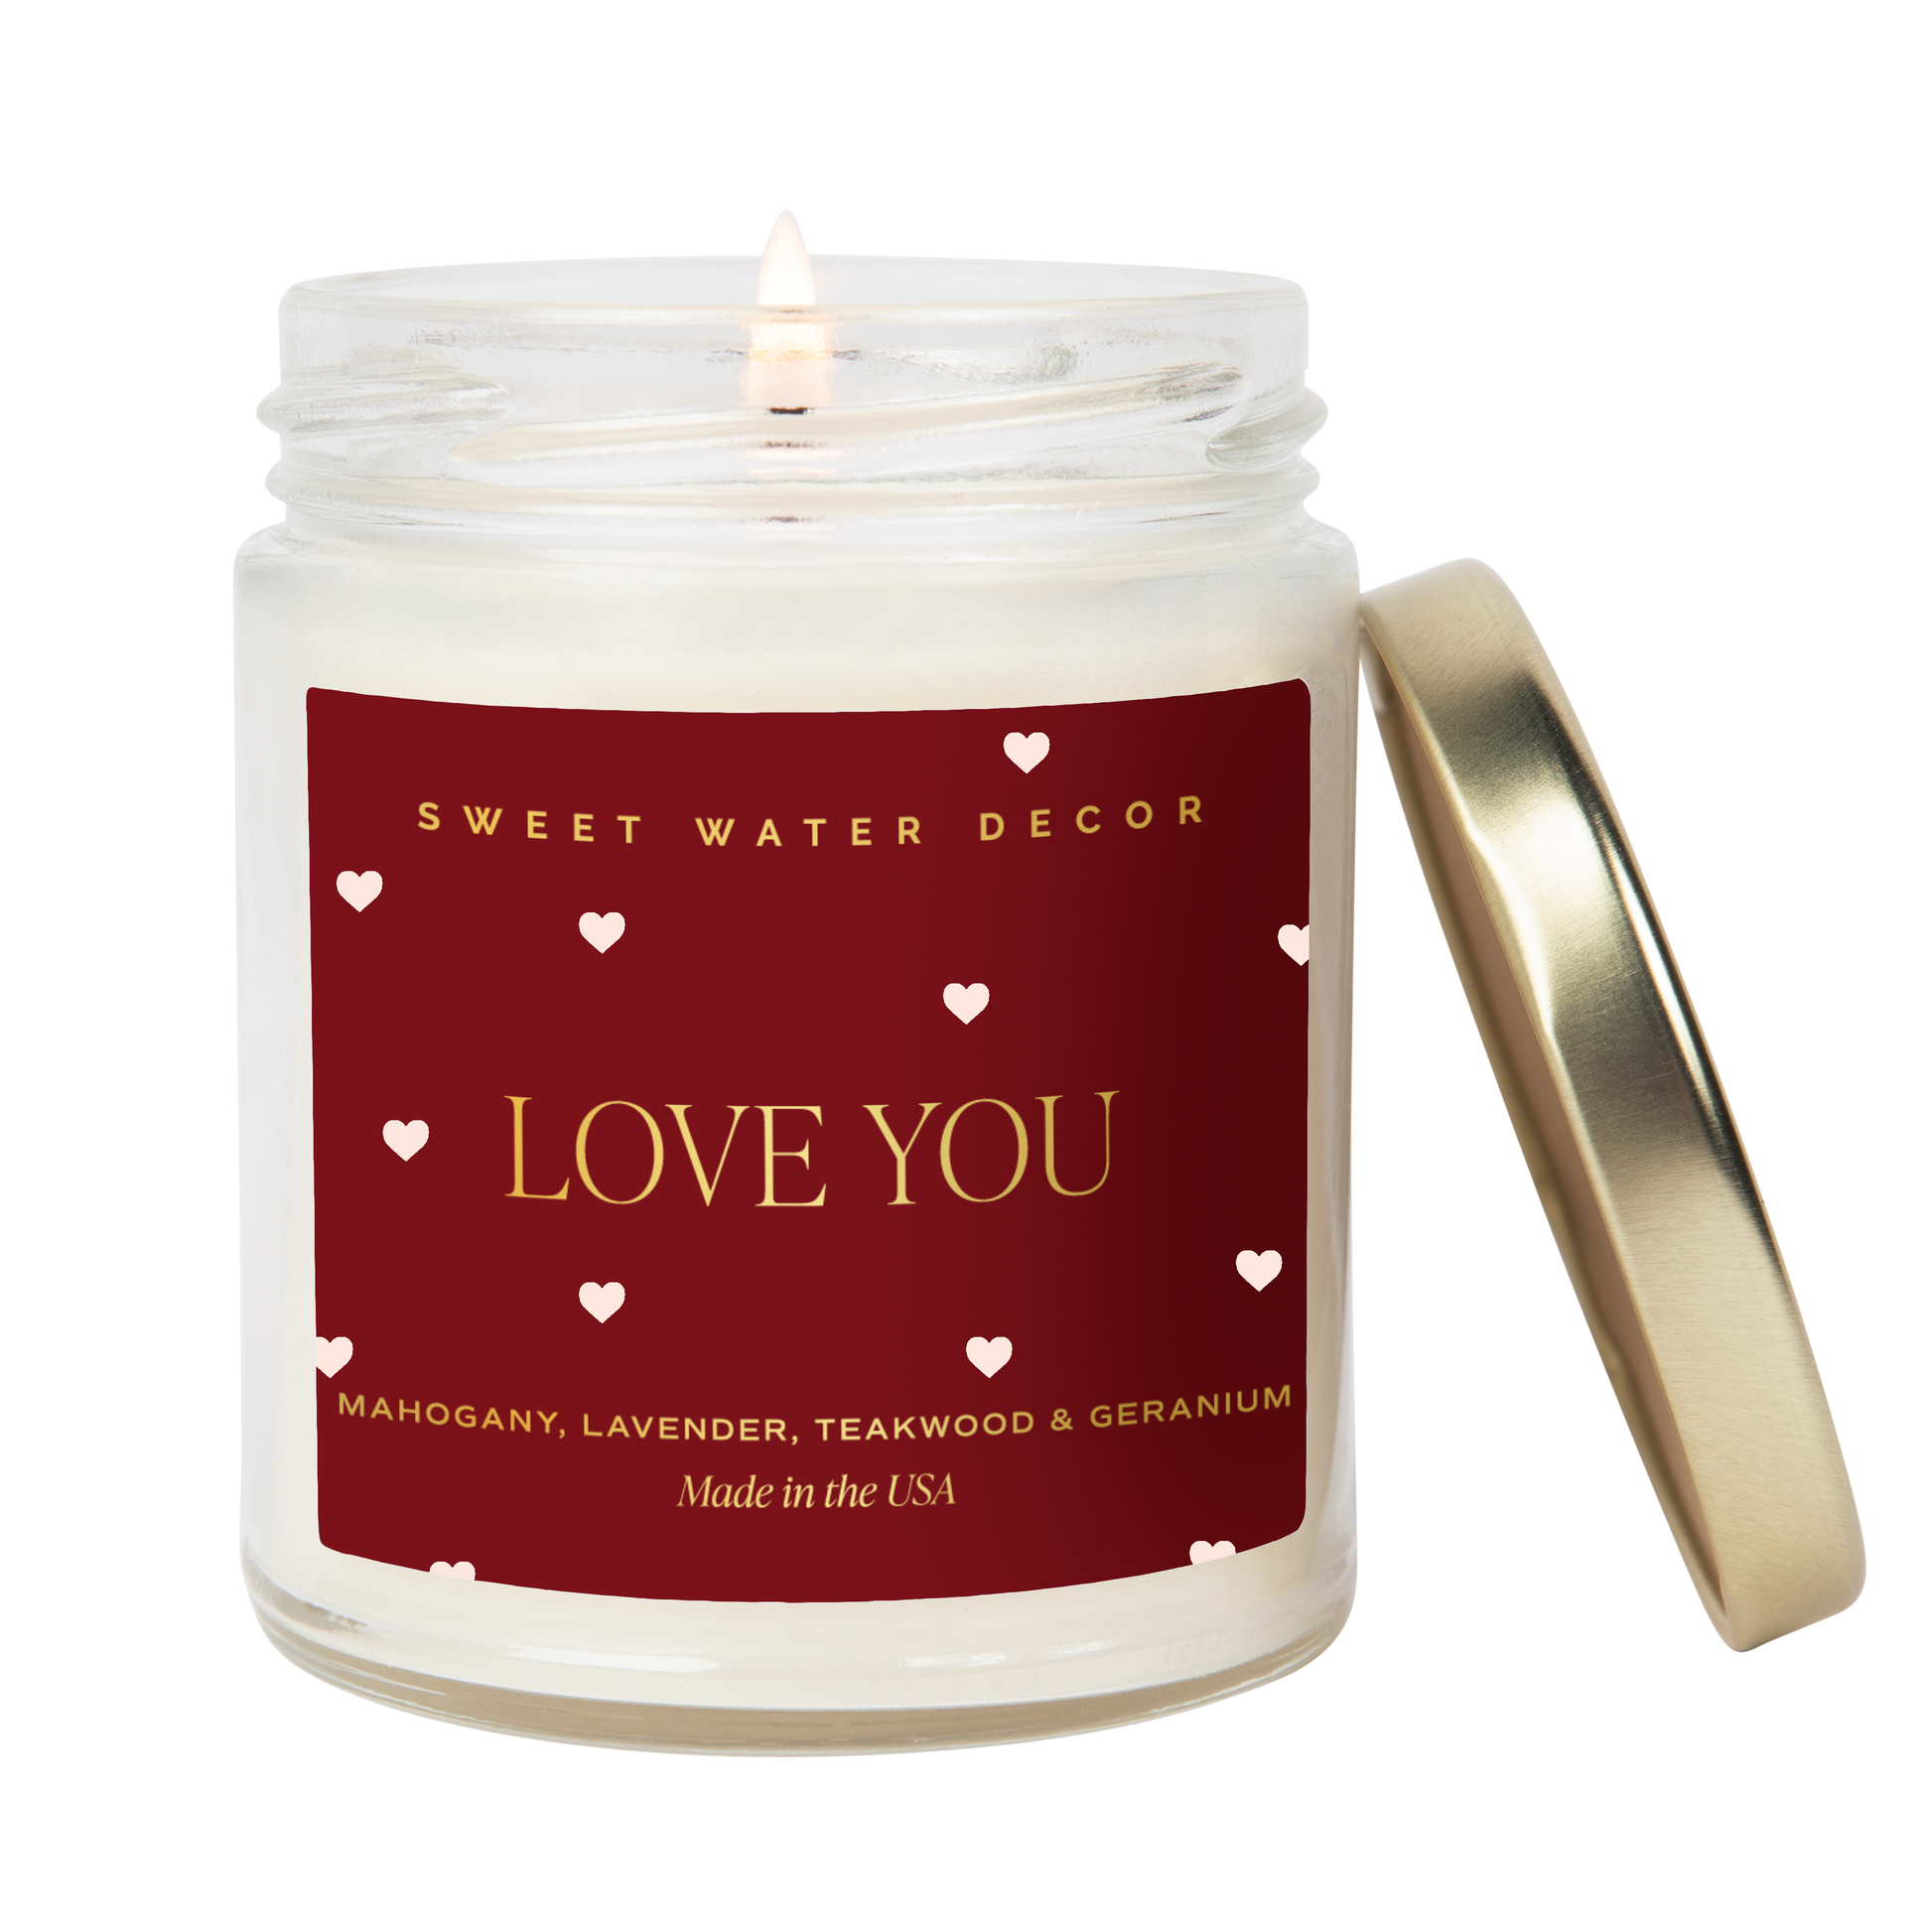 Love you candle